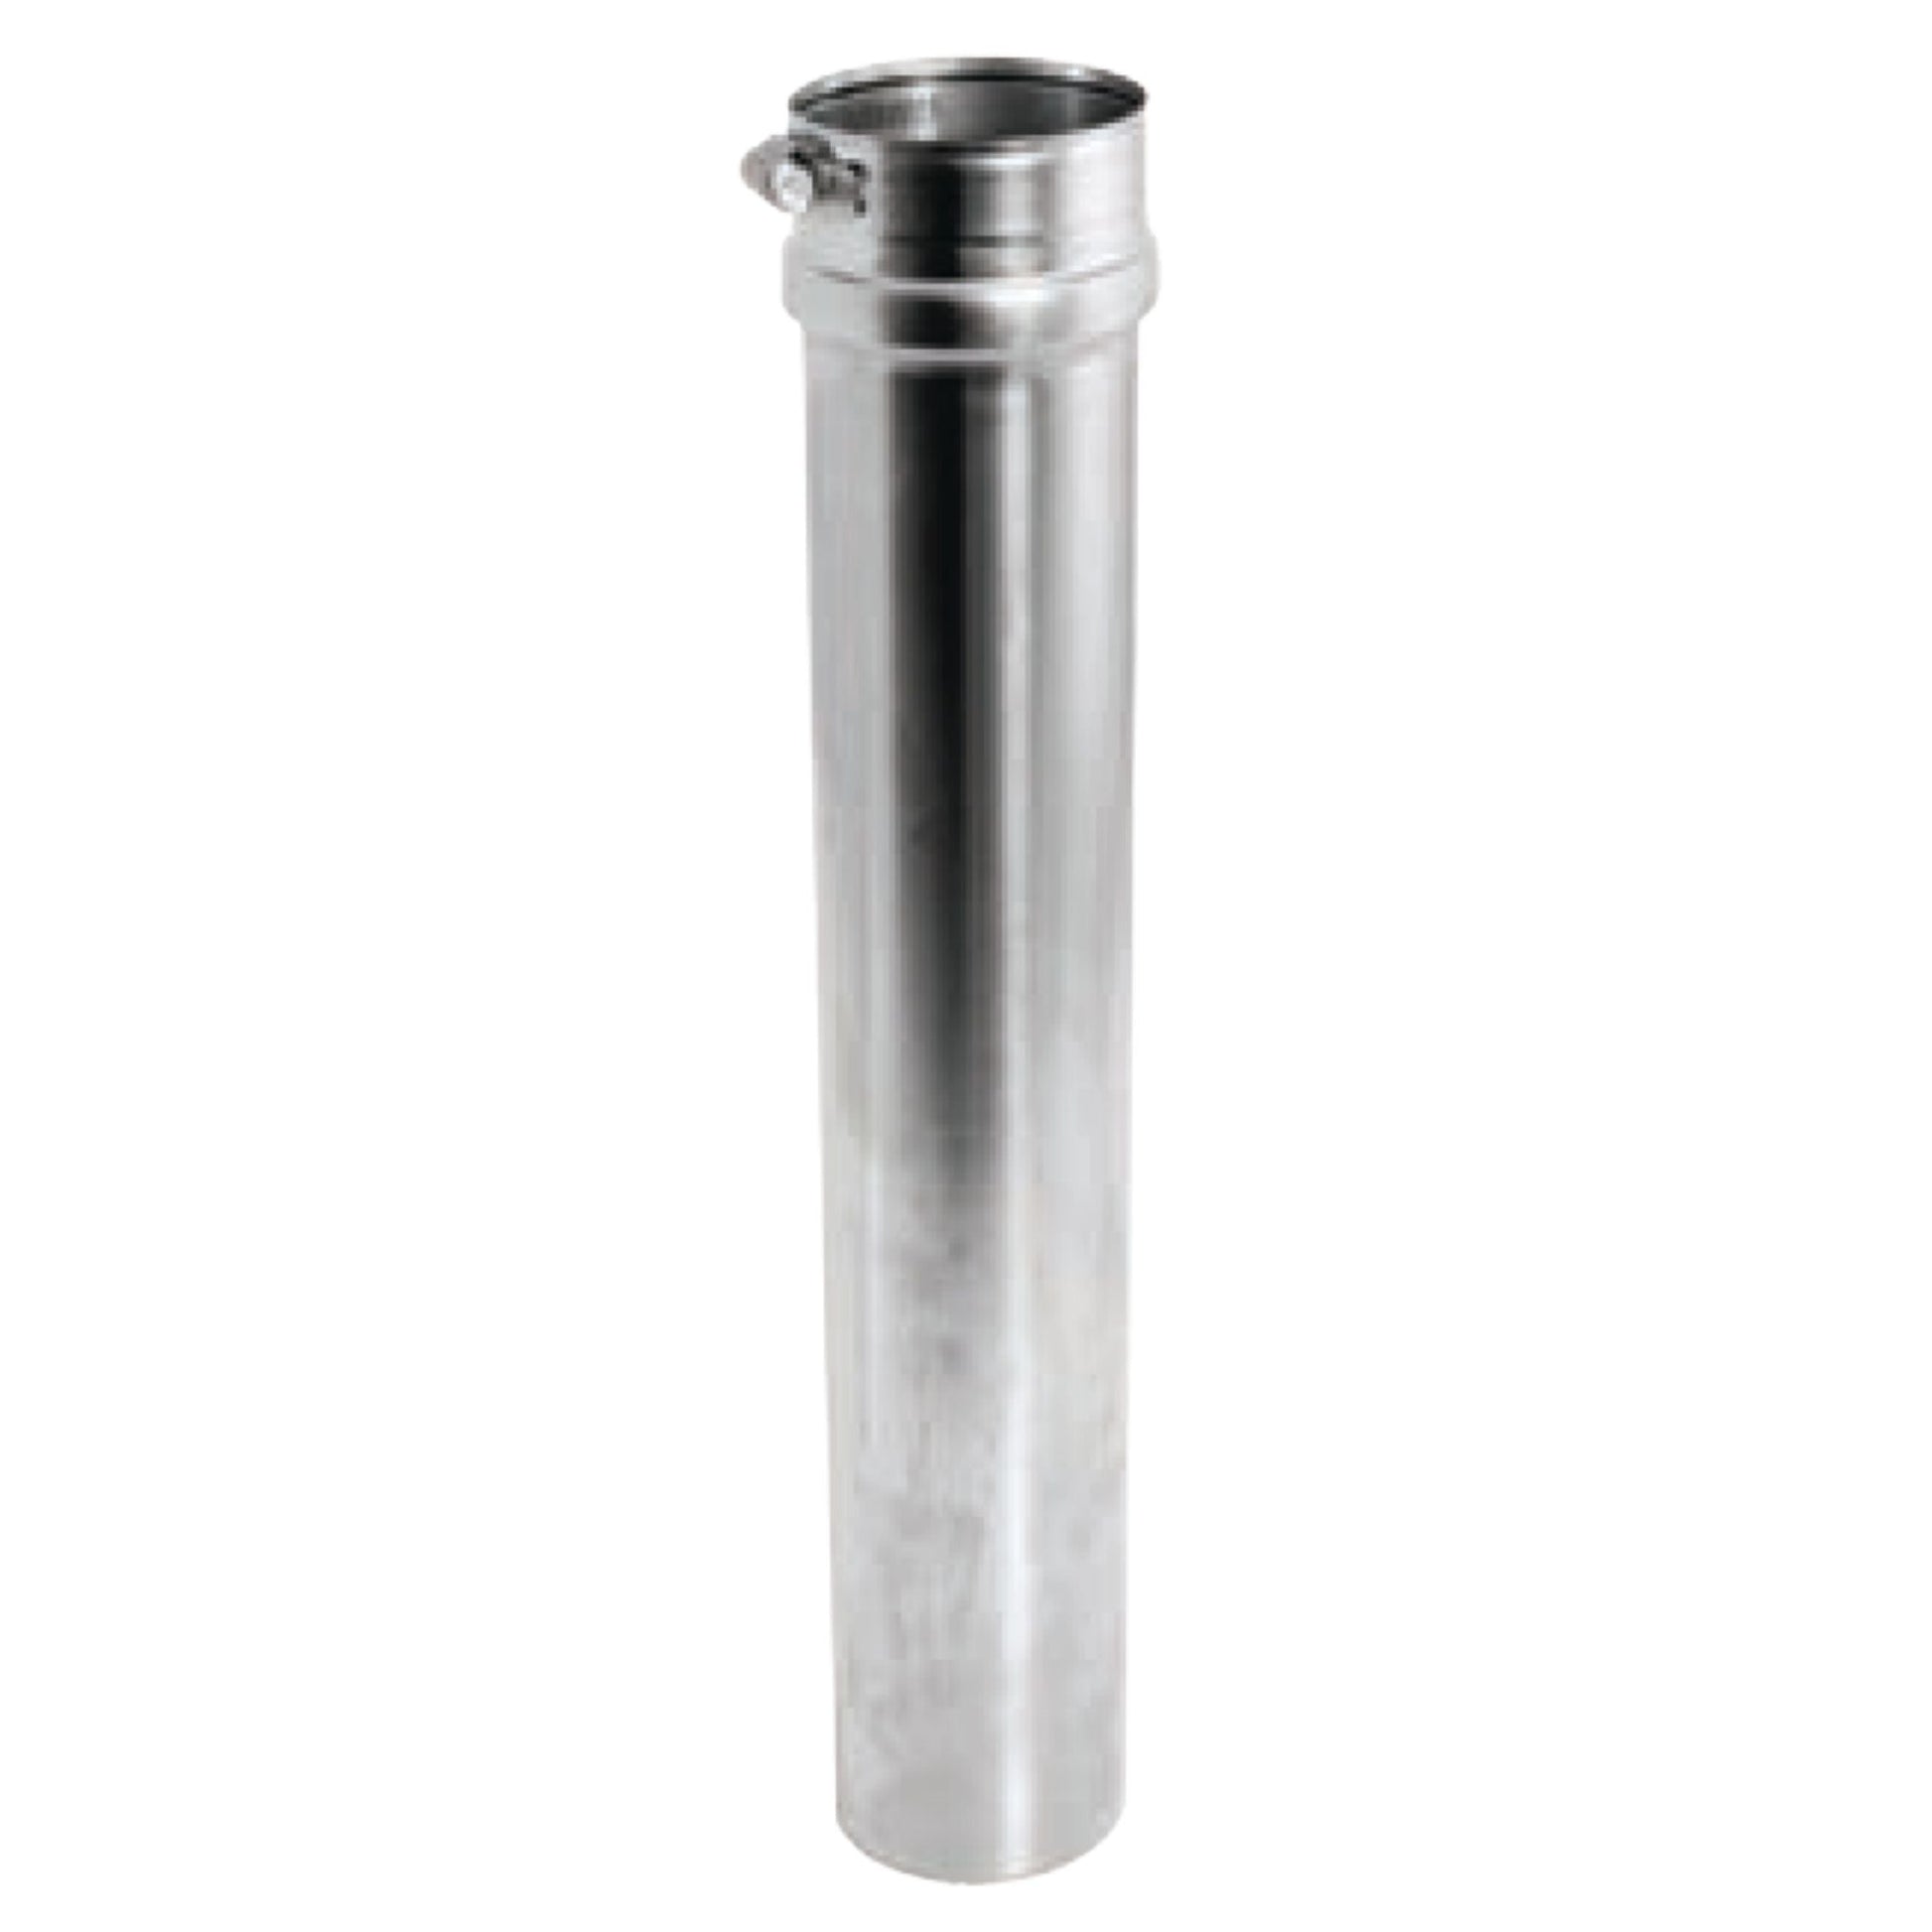 DuraVent FasNSeal 6" x 18" 316L Stainless Steel Adjustable Vent Length